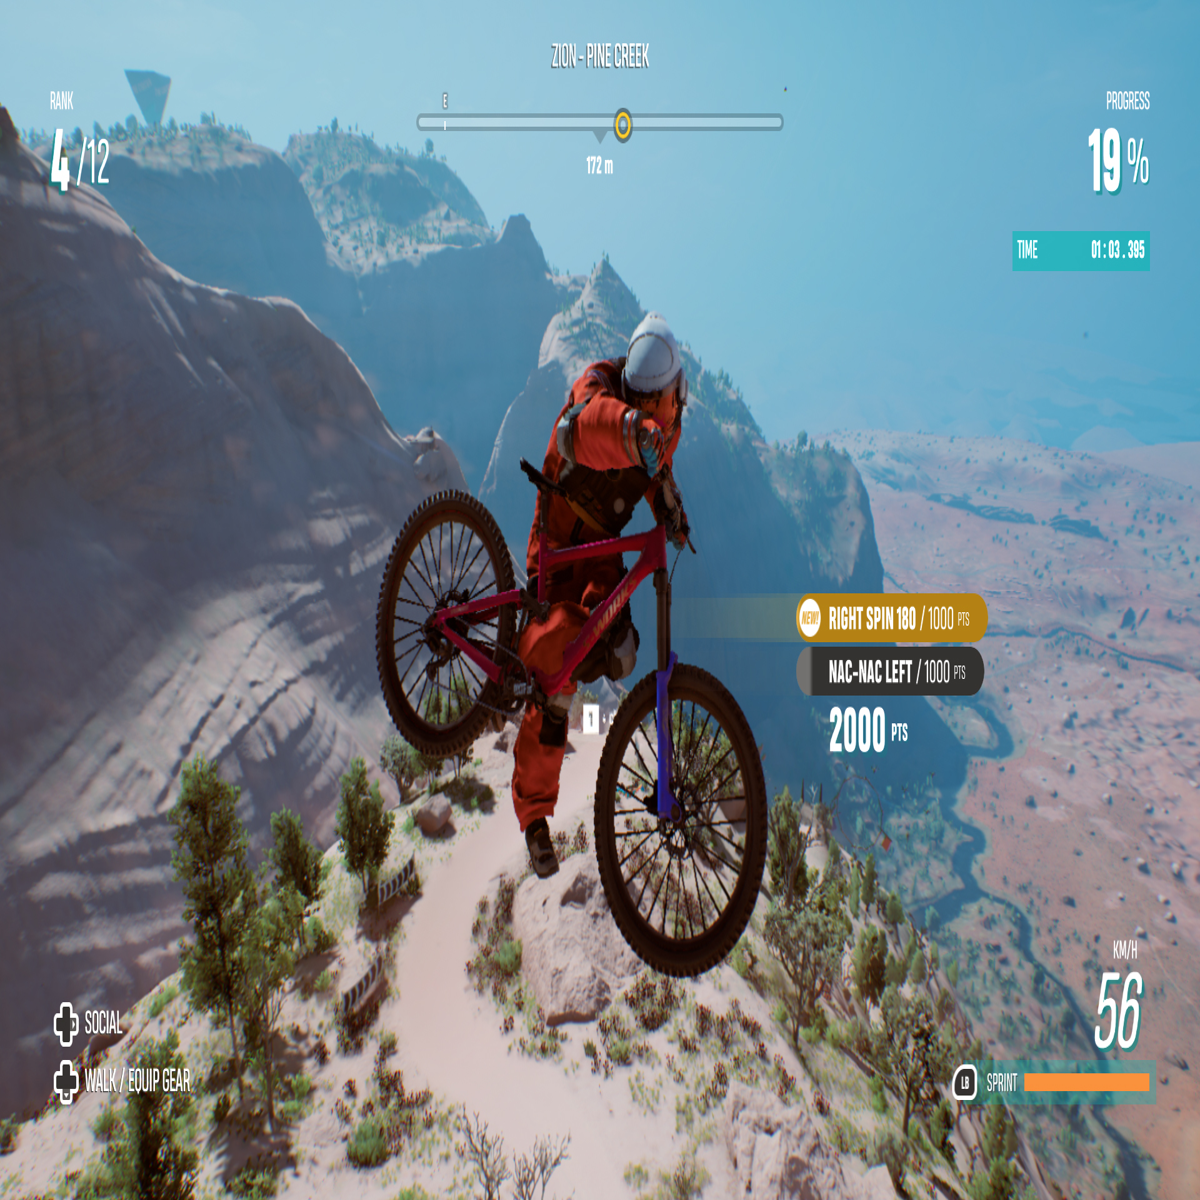 Riders Republic Is A New PS5 And PS4 Extreme Sports Game From